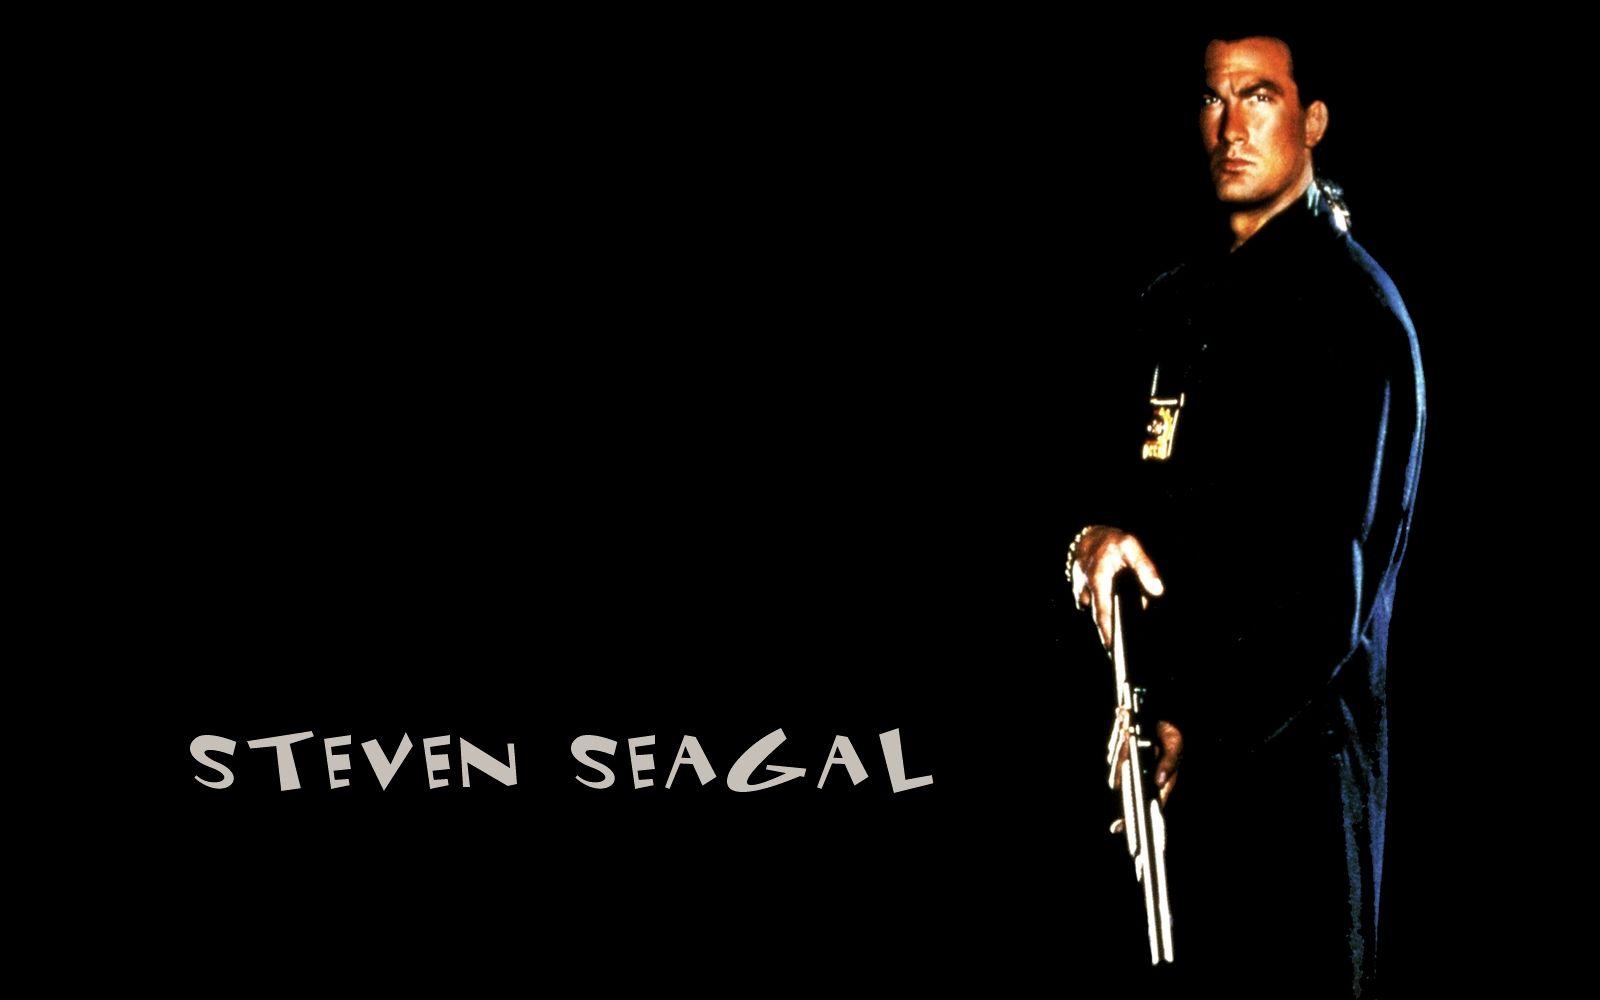 Showing Media & Posts for Funny steven seagal wallpaper